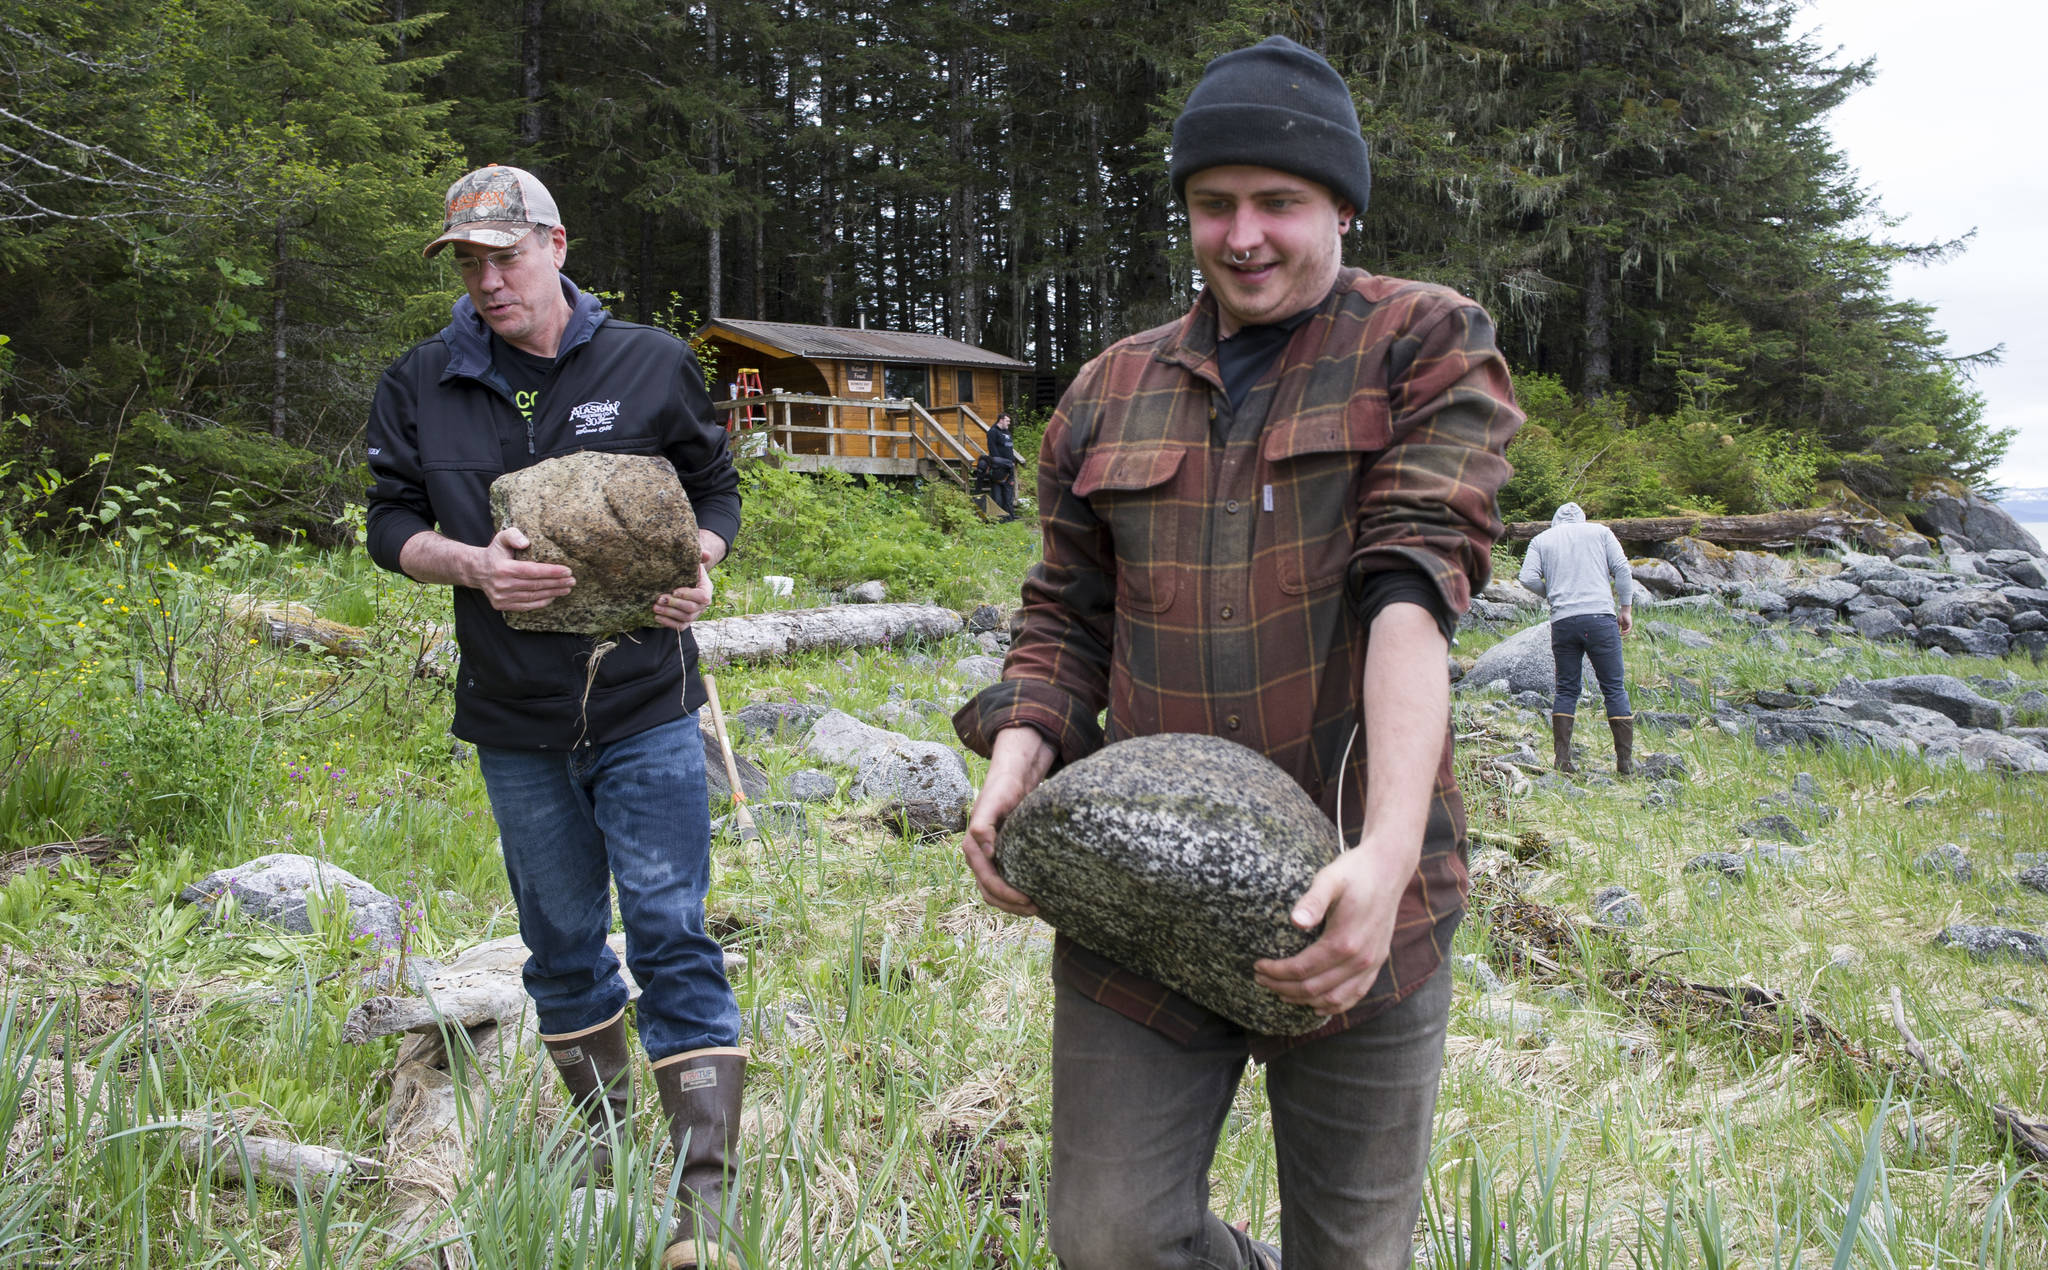 Andy Kline, communications director for the Alaskan Brewing Company, left, helps Trail Mix employee Mike Cotyk gather rocks for a path leading to the U.S. Forest Service’s Berners Bay Cabin on Thursday, May 25, 2017. (Michael Penn | Juneau Empire)